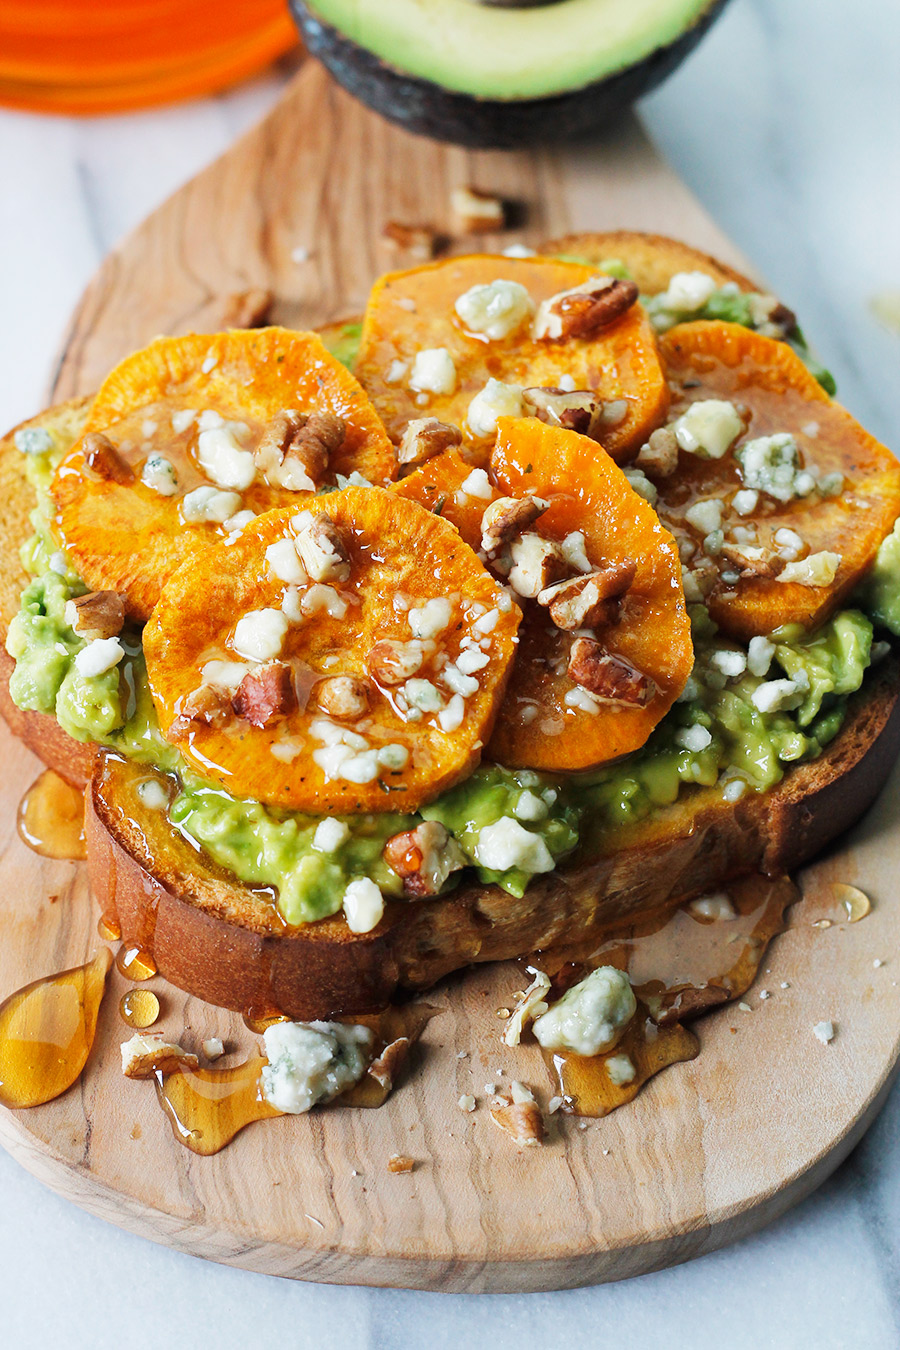 Avocado toast topped with roasted sweet potato rounds sprinkled blue cheese, pecans and drizzled with honey,